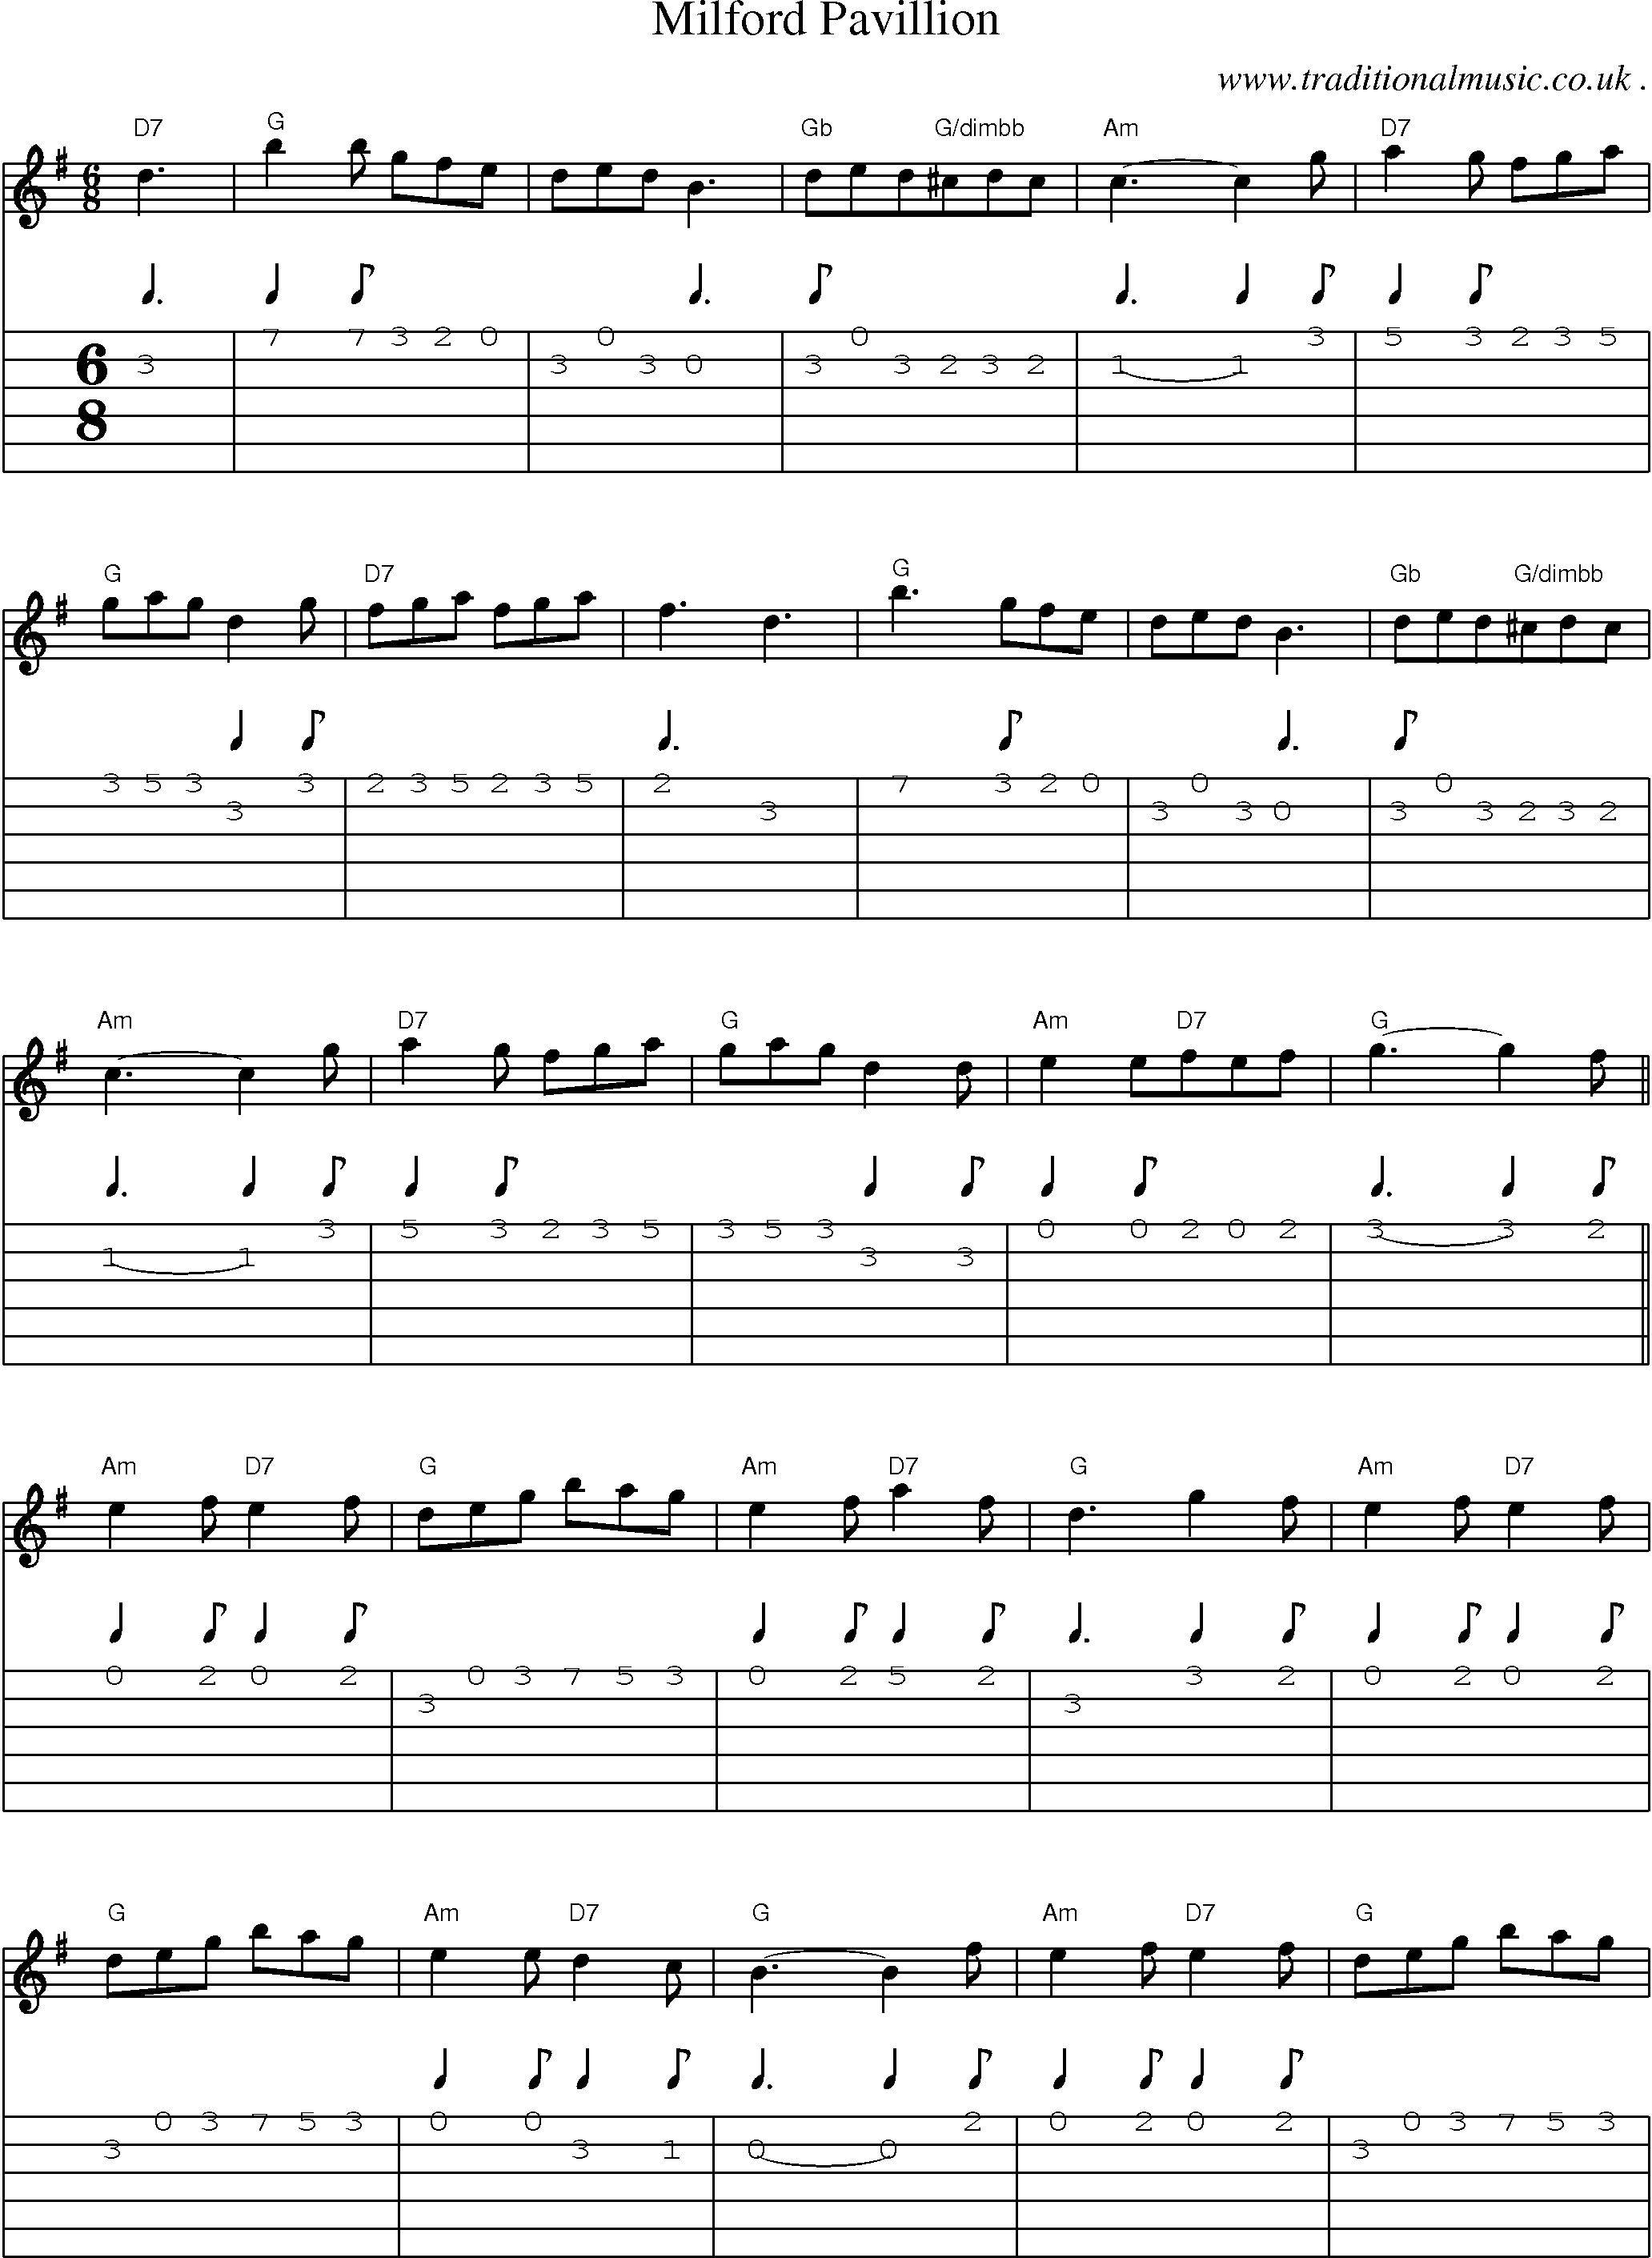 Sheet-Music and Guitar Tabs for Milford Pavillion